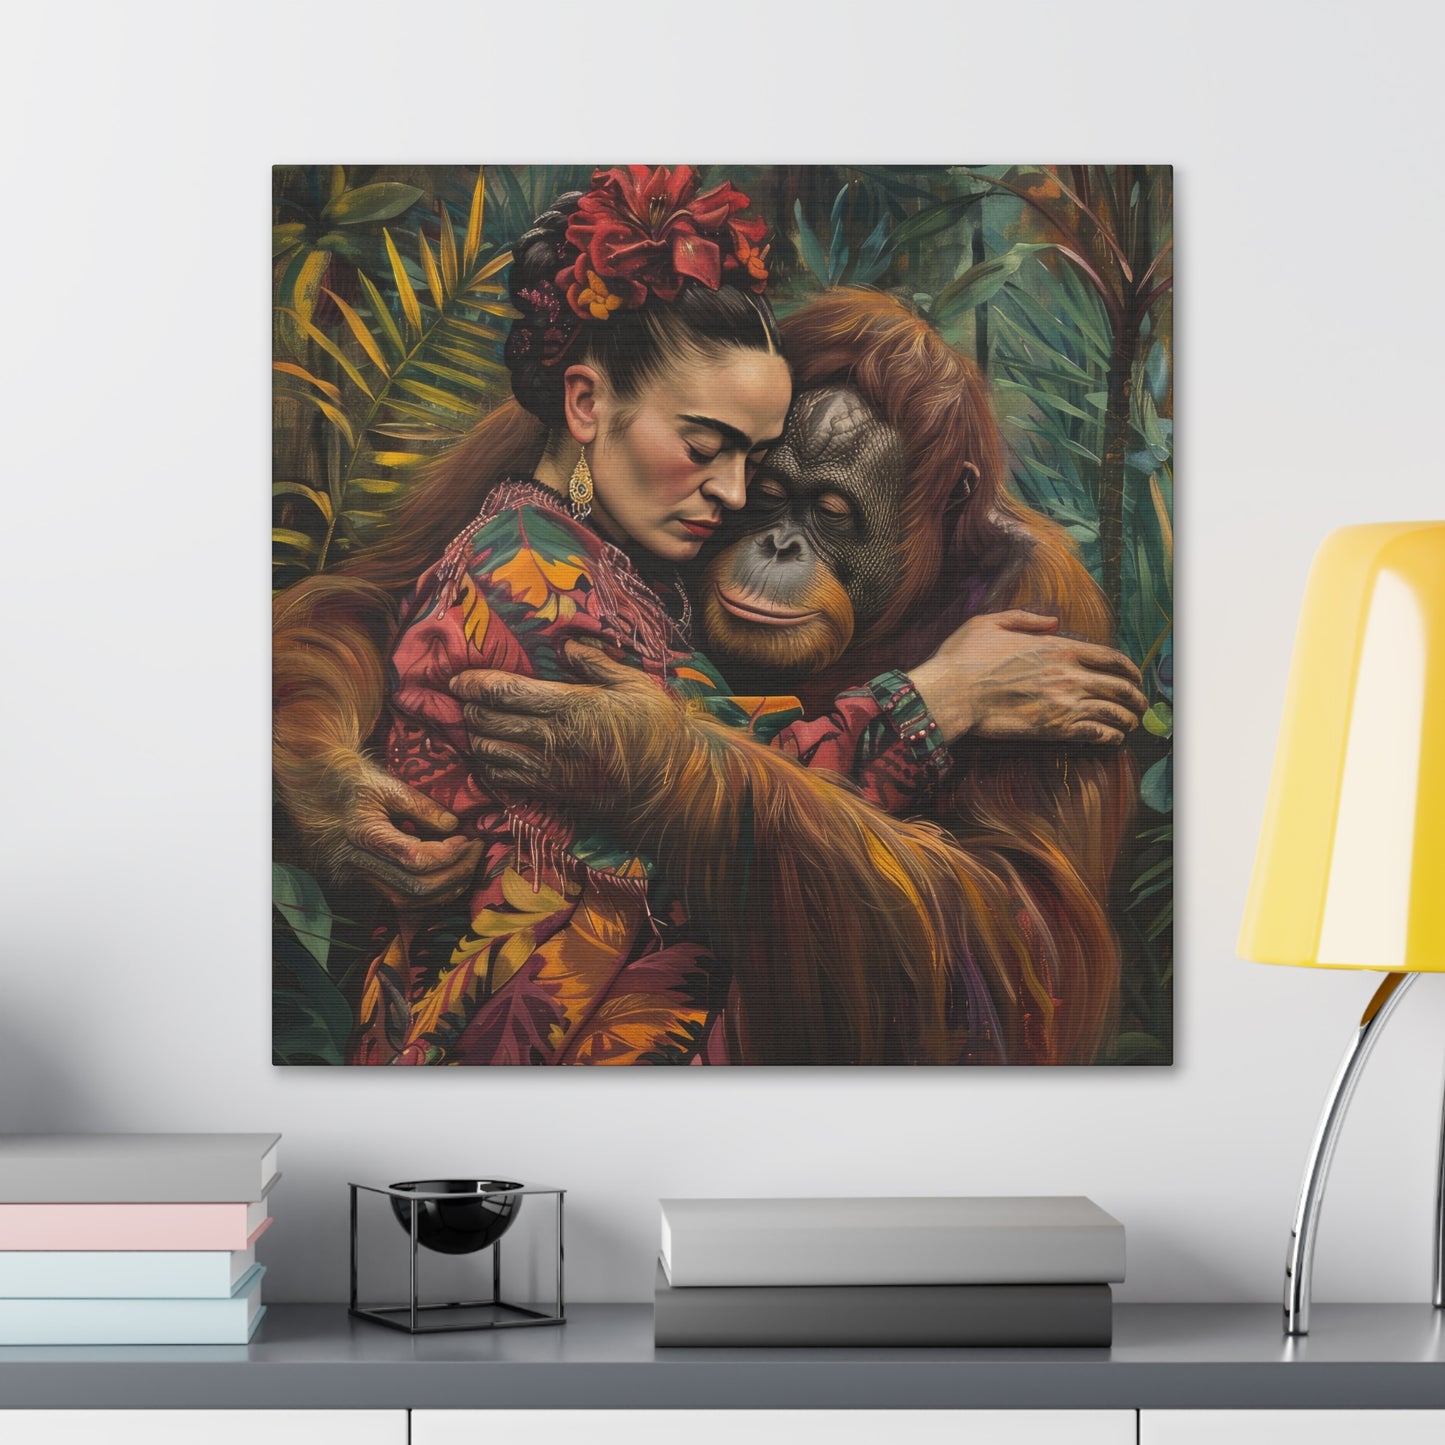 A vibrant Printify canvas print of David Miller's "Embrace of the Wild" artwork, depicting a woman embracing an orangutan, hung on a wall above a desk with books and a lamp.